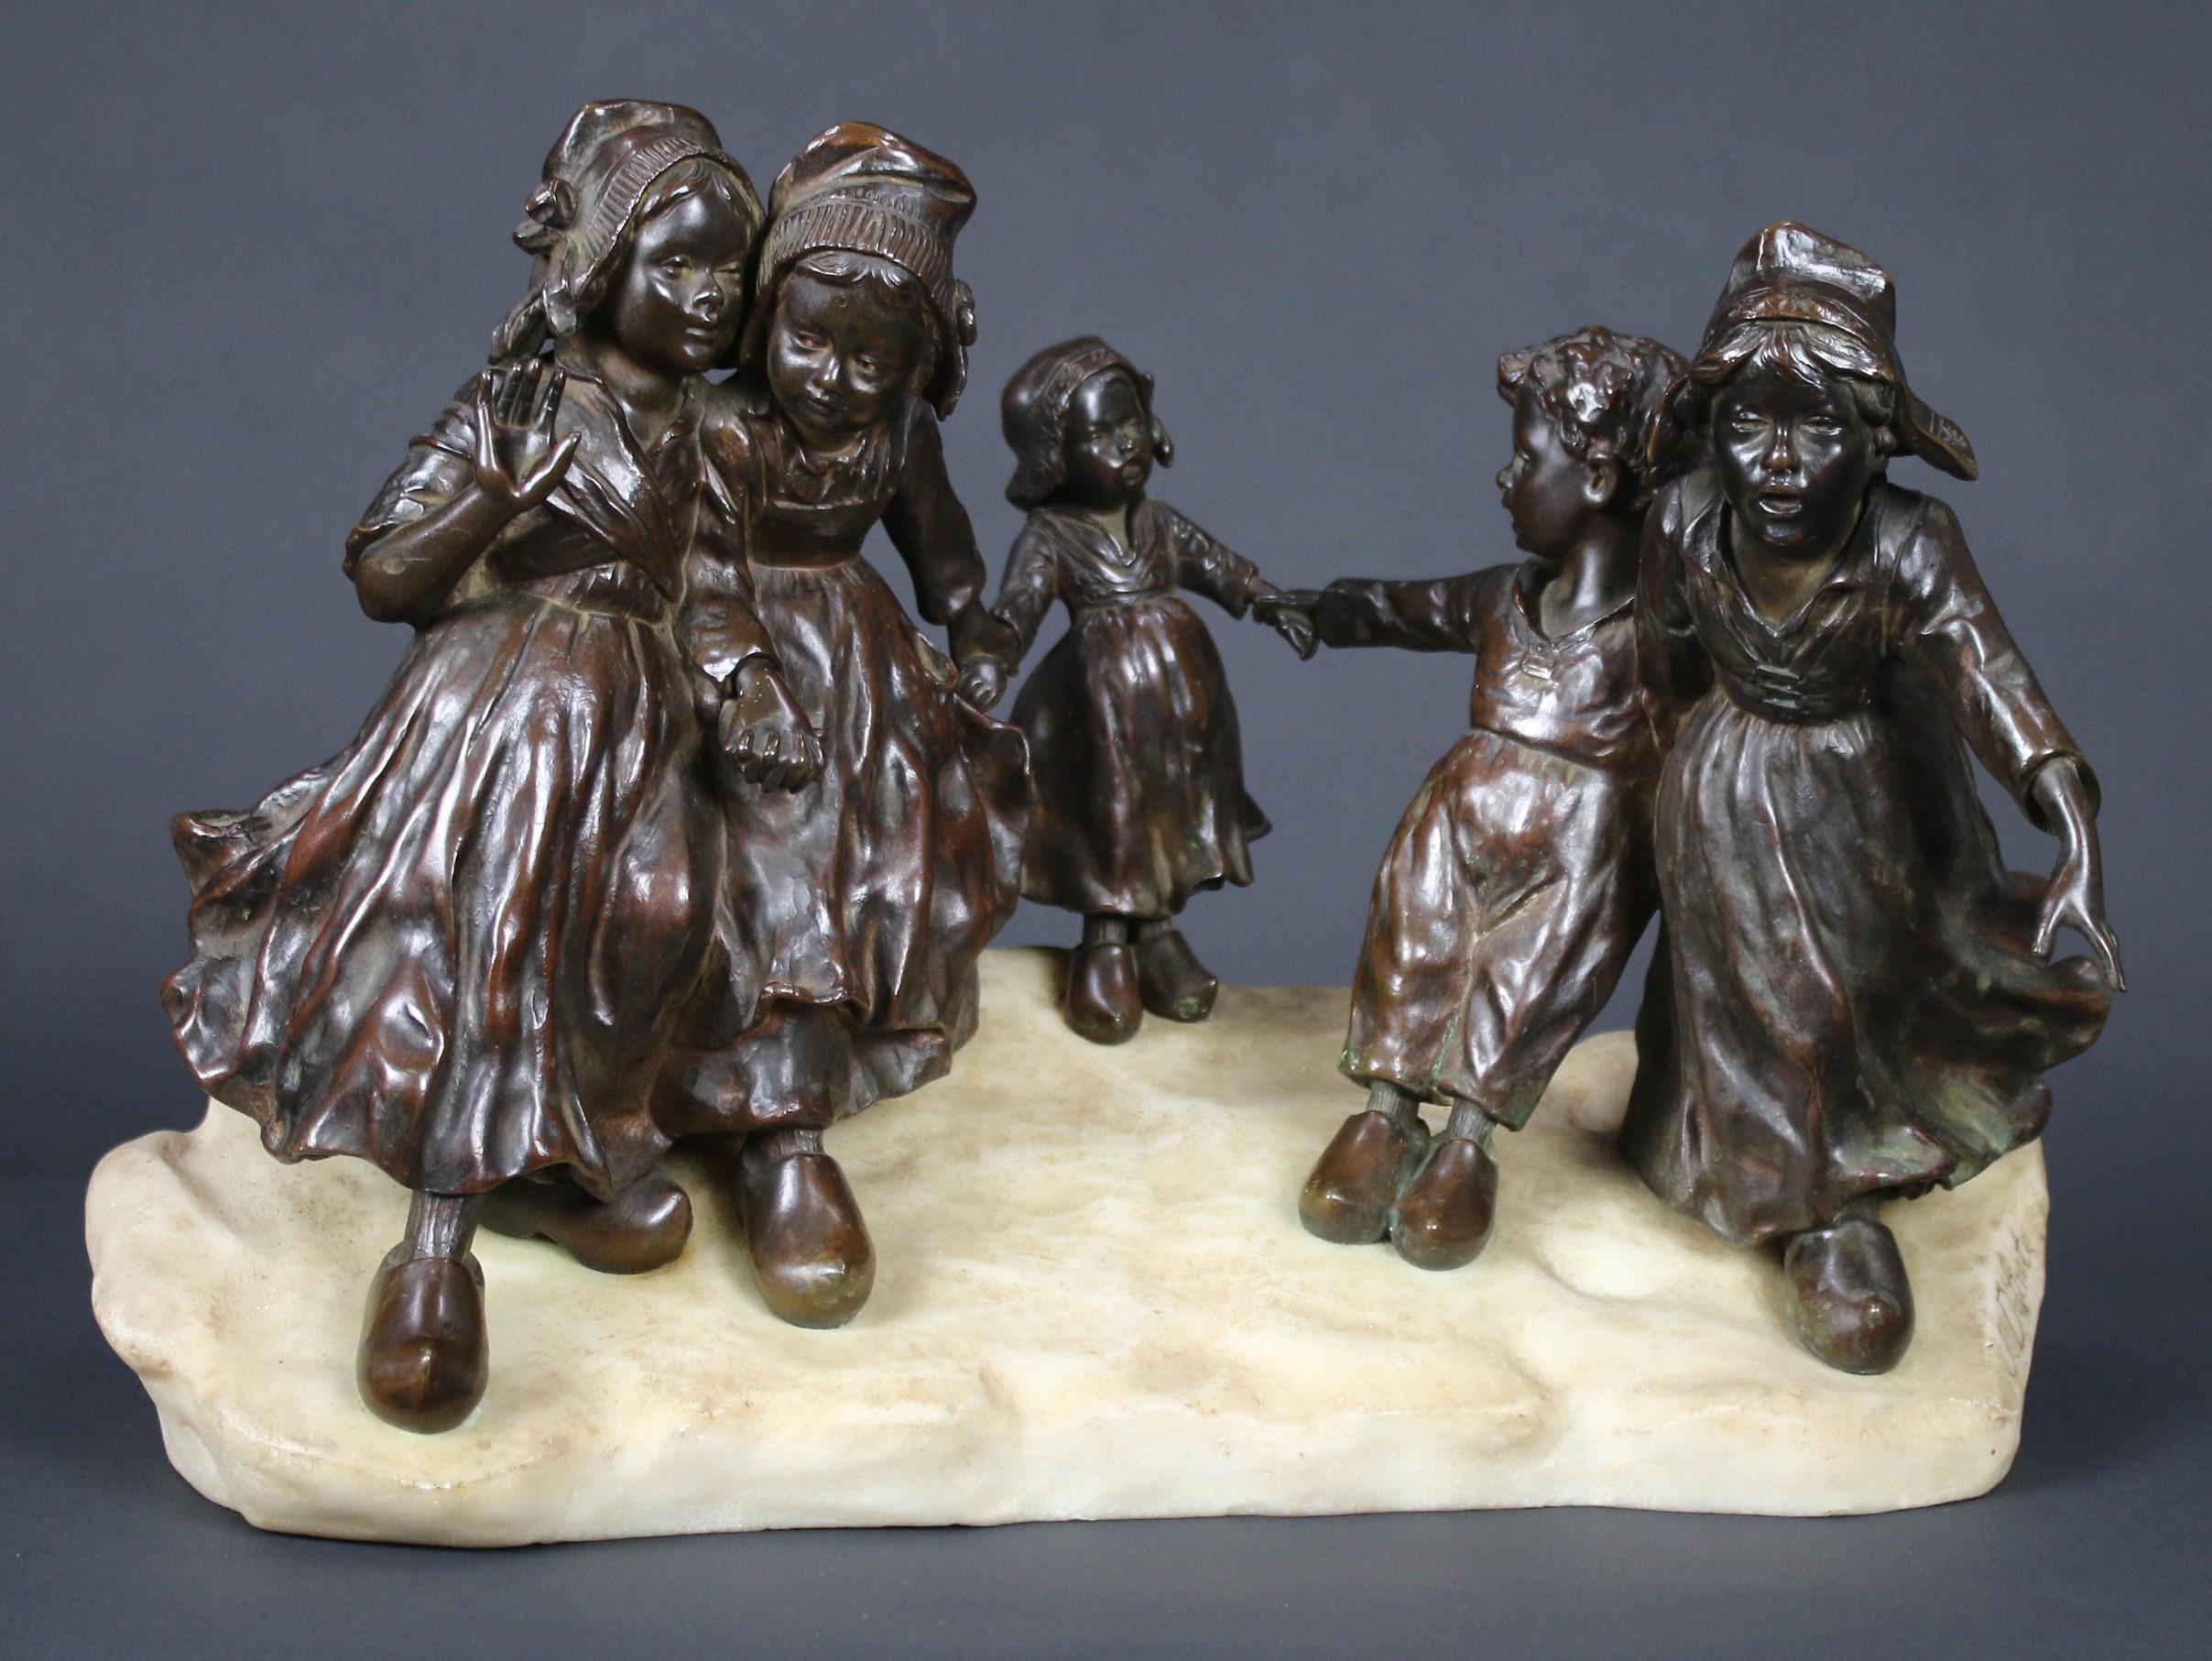 Joseph D'Aste bronze group of Children in traditional dress with clogs playing in the snow, standing on marble.